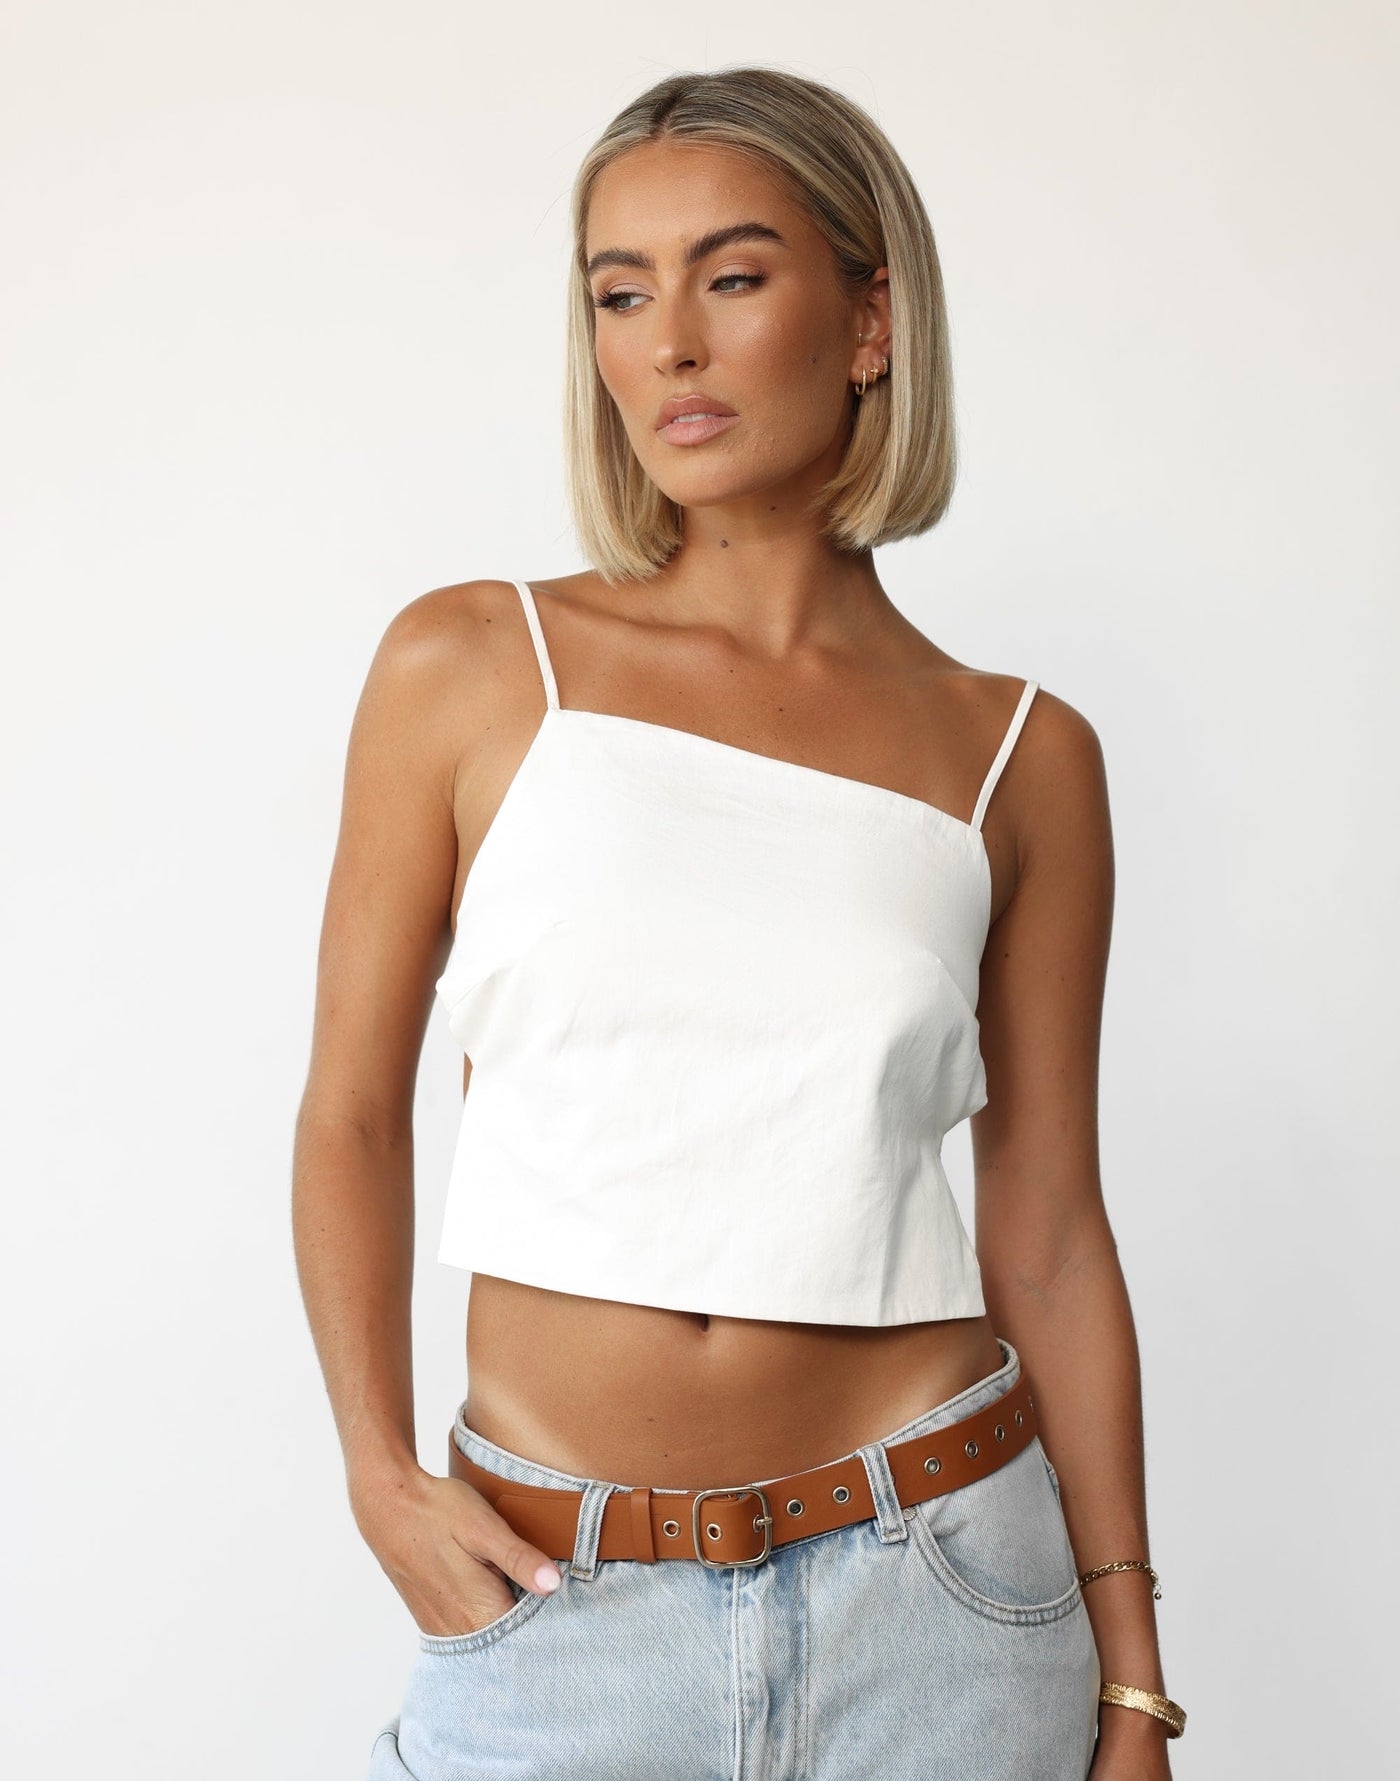 Adeola Top (White) - Asymmetrical Neckline Backless Top - Women's Top - Charcoal Clothing